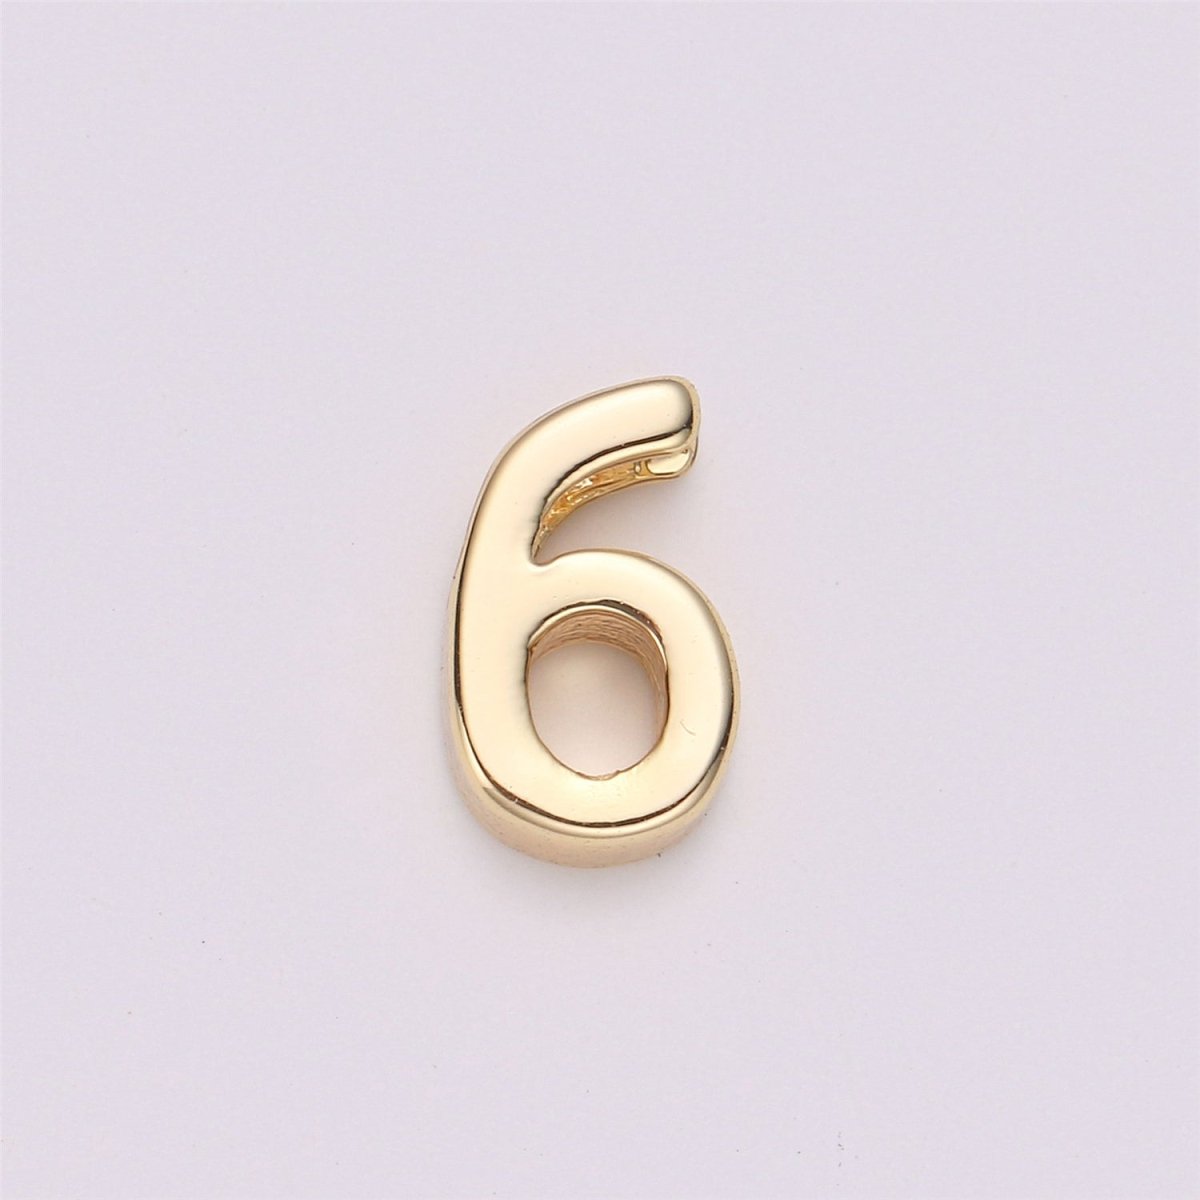 14k Gold Filled Number Charms With 1.5mm Open Sides, Lucky number set for necklace jewelry bracelet making Supply Slide Letter Pendant - DLUXCA